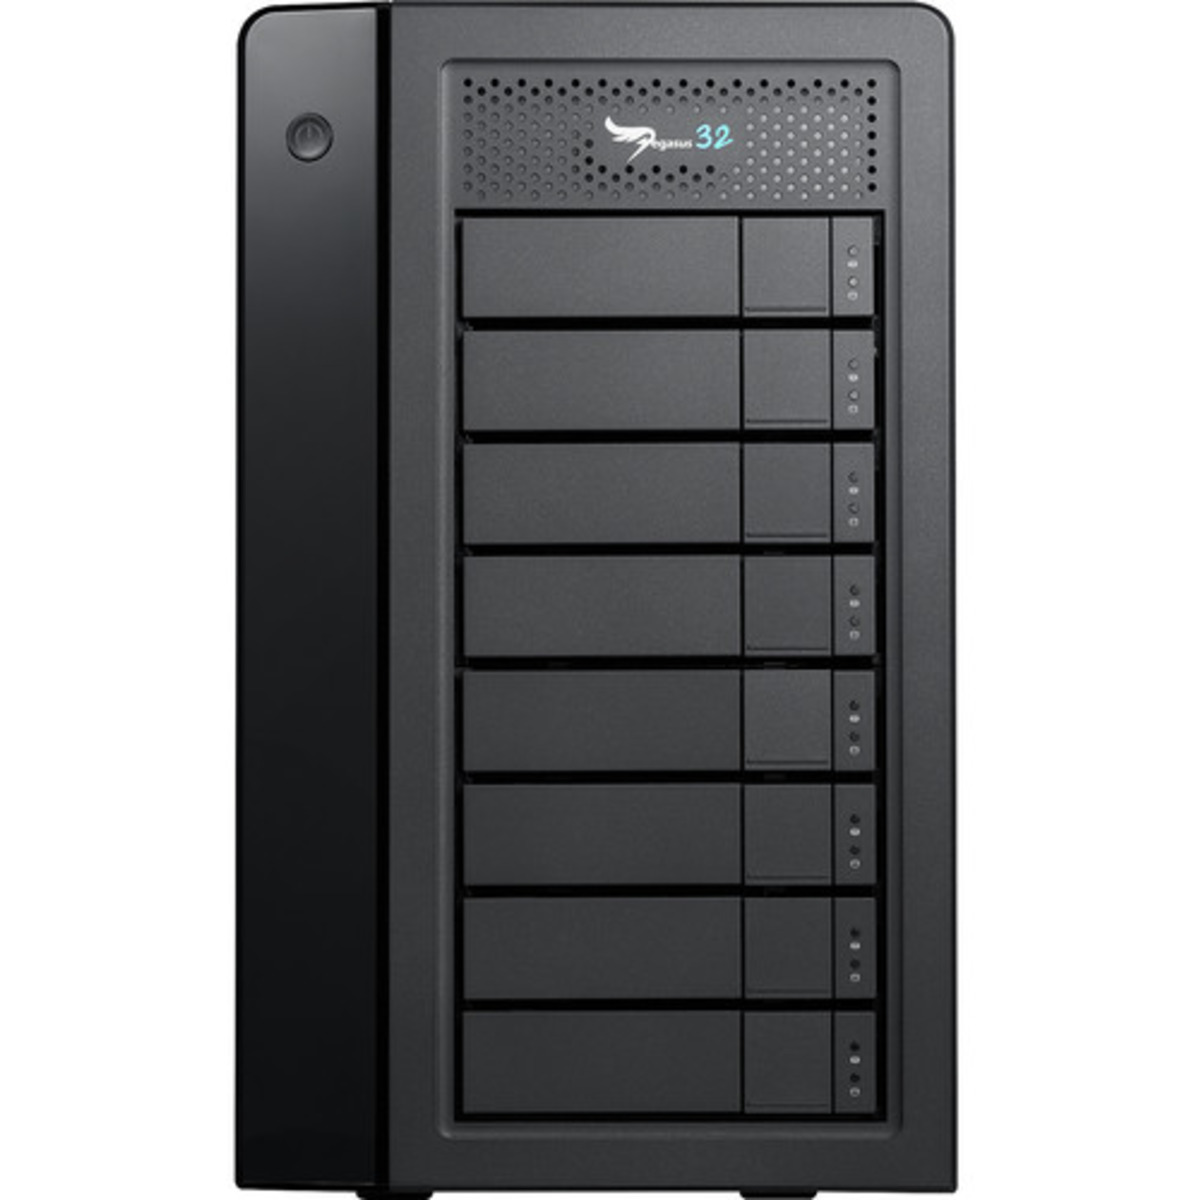 Promise Technology Pegasus32 R8 Thunderbolt 3 24tb 8-Bay Desktop Multimedia / Power User / Business DAS - Direct Attached Storage Device 4x6tb Seagate BarraCuda ST6000DM003 3.5 5400rpm SATA 6Gb/s HDD CONSUMER Class Drives Installed - Burn-In Tested - ON SALE Pegasus32 R8 Thunderbolt 3